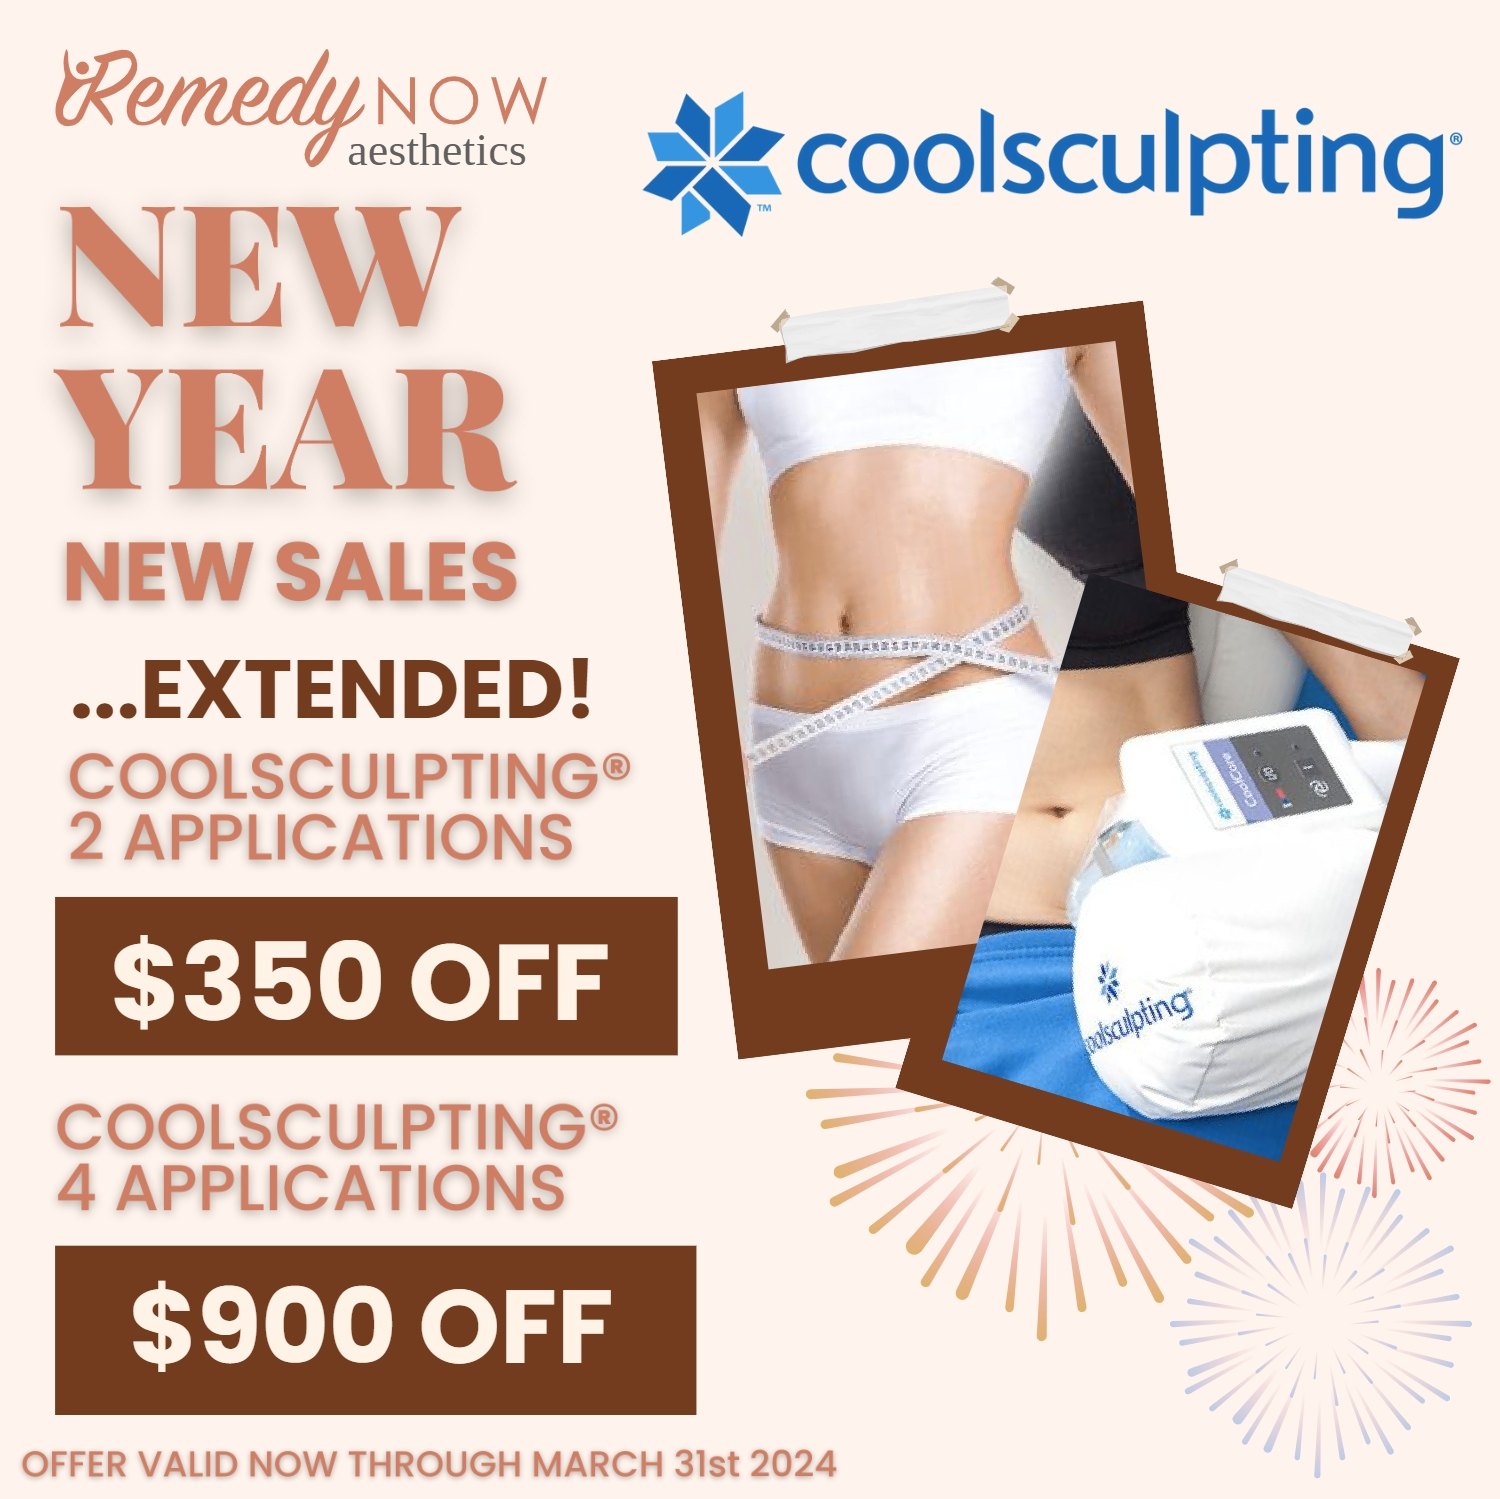 RemedyNow Aesthetics January Special Offer Part 2